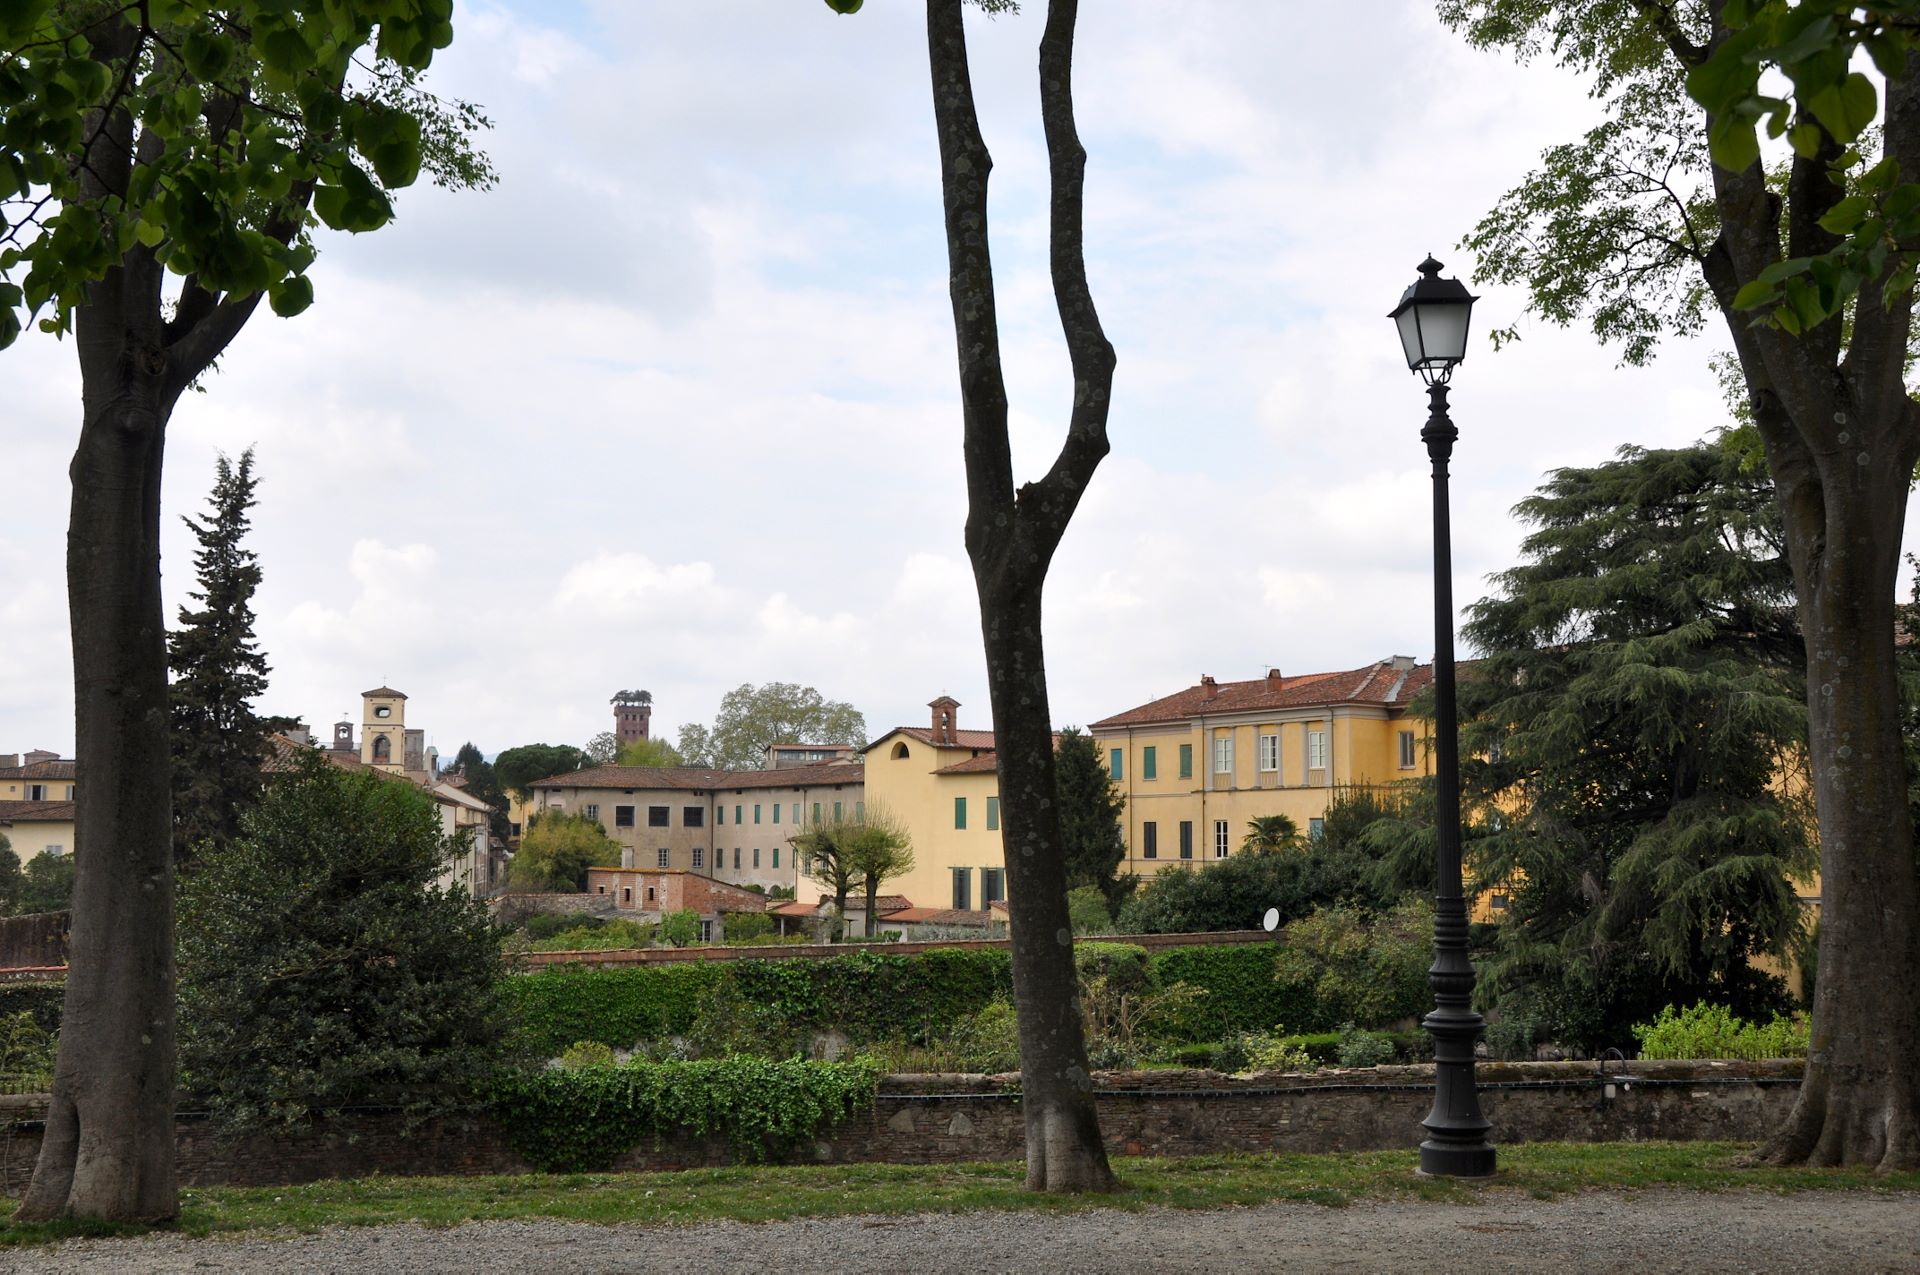 ww:2017-lucca:2017-04-06-lucca-445a.jpg